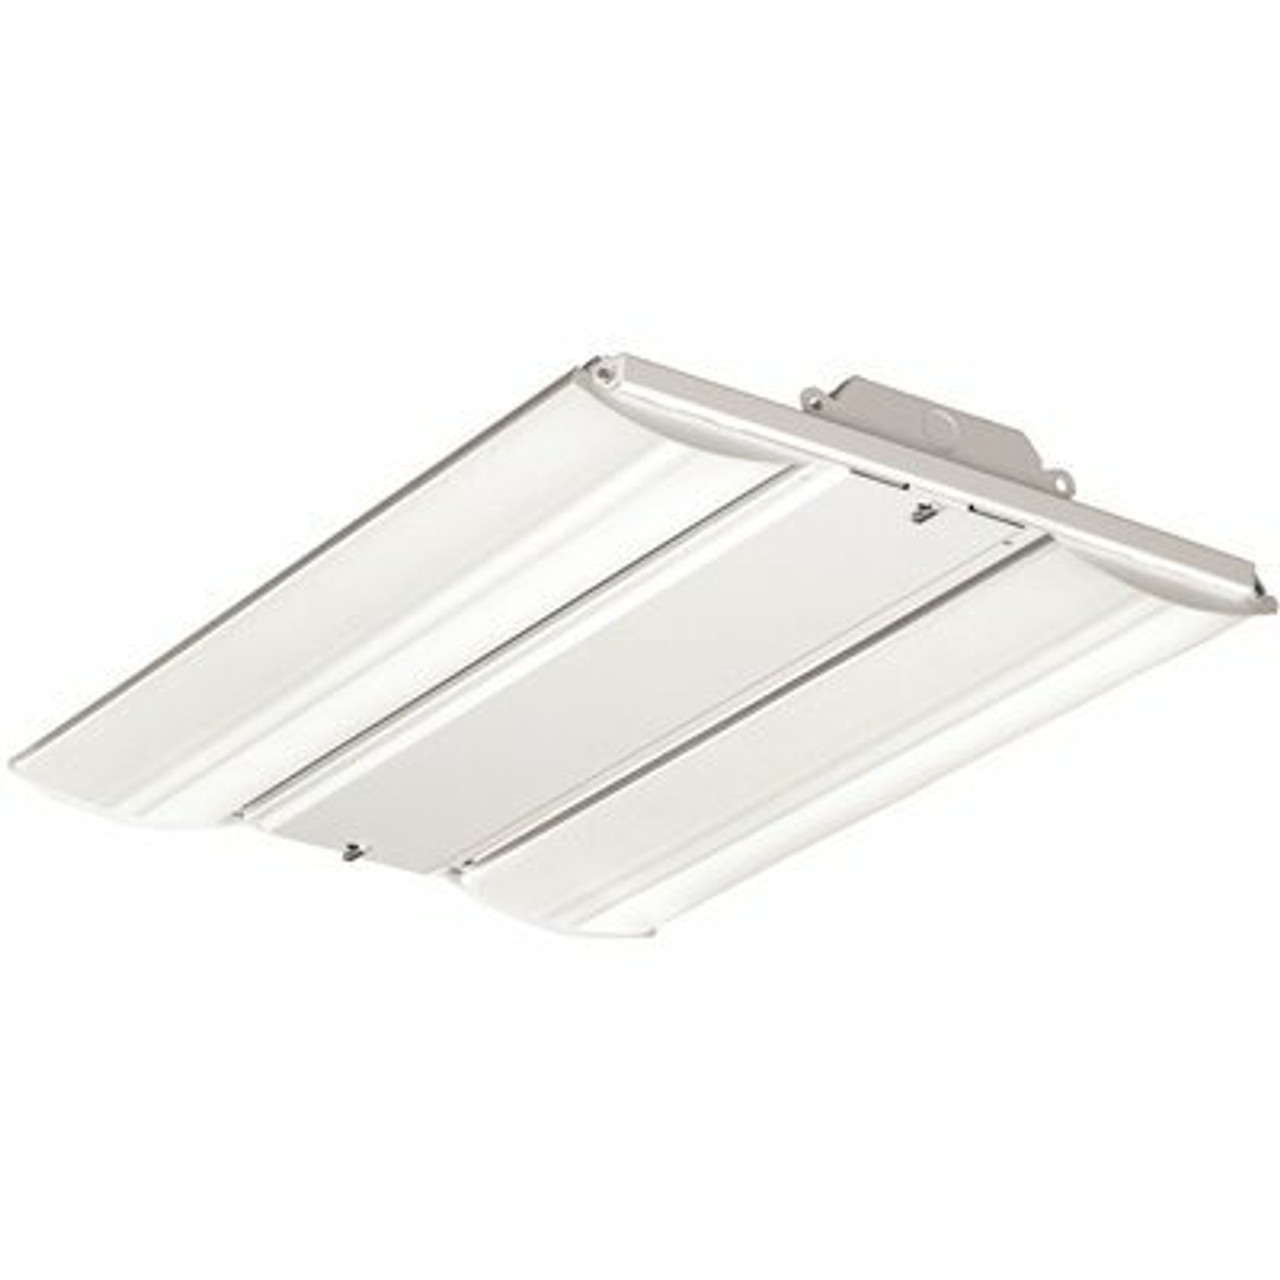 Hubbell Lighting Peloton 2 Ft. 128-Watt Equivalent Integrated Led White High Bay Light With Wide Distribution, 5000K